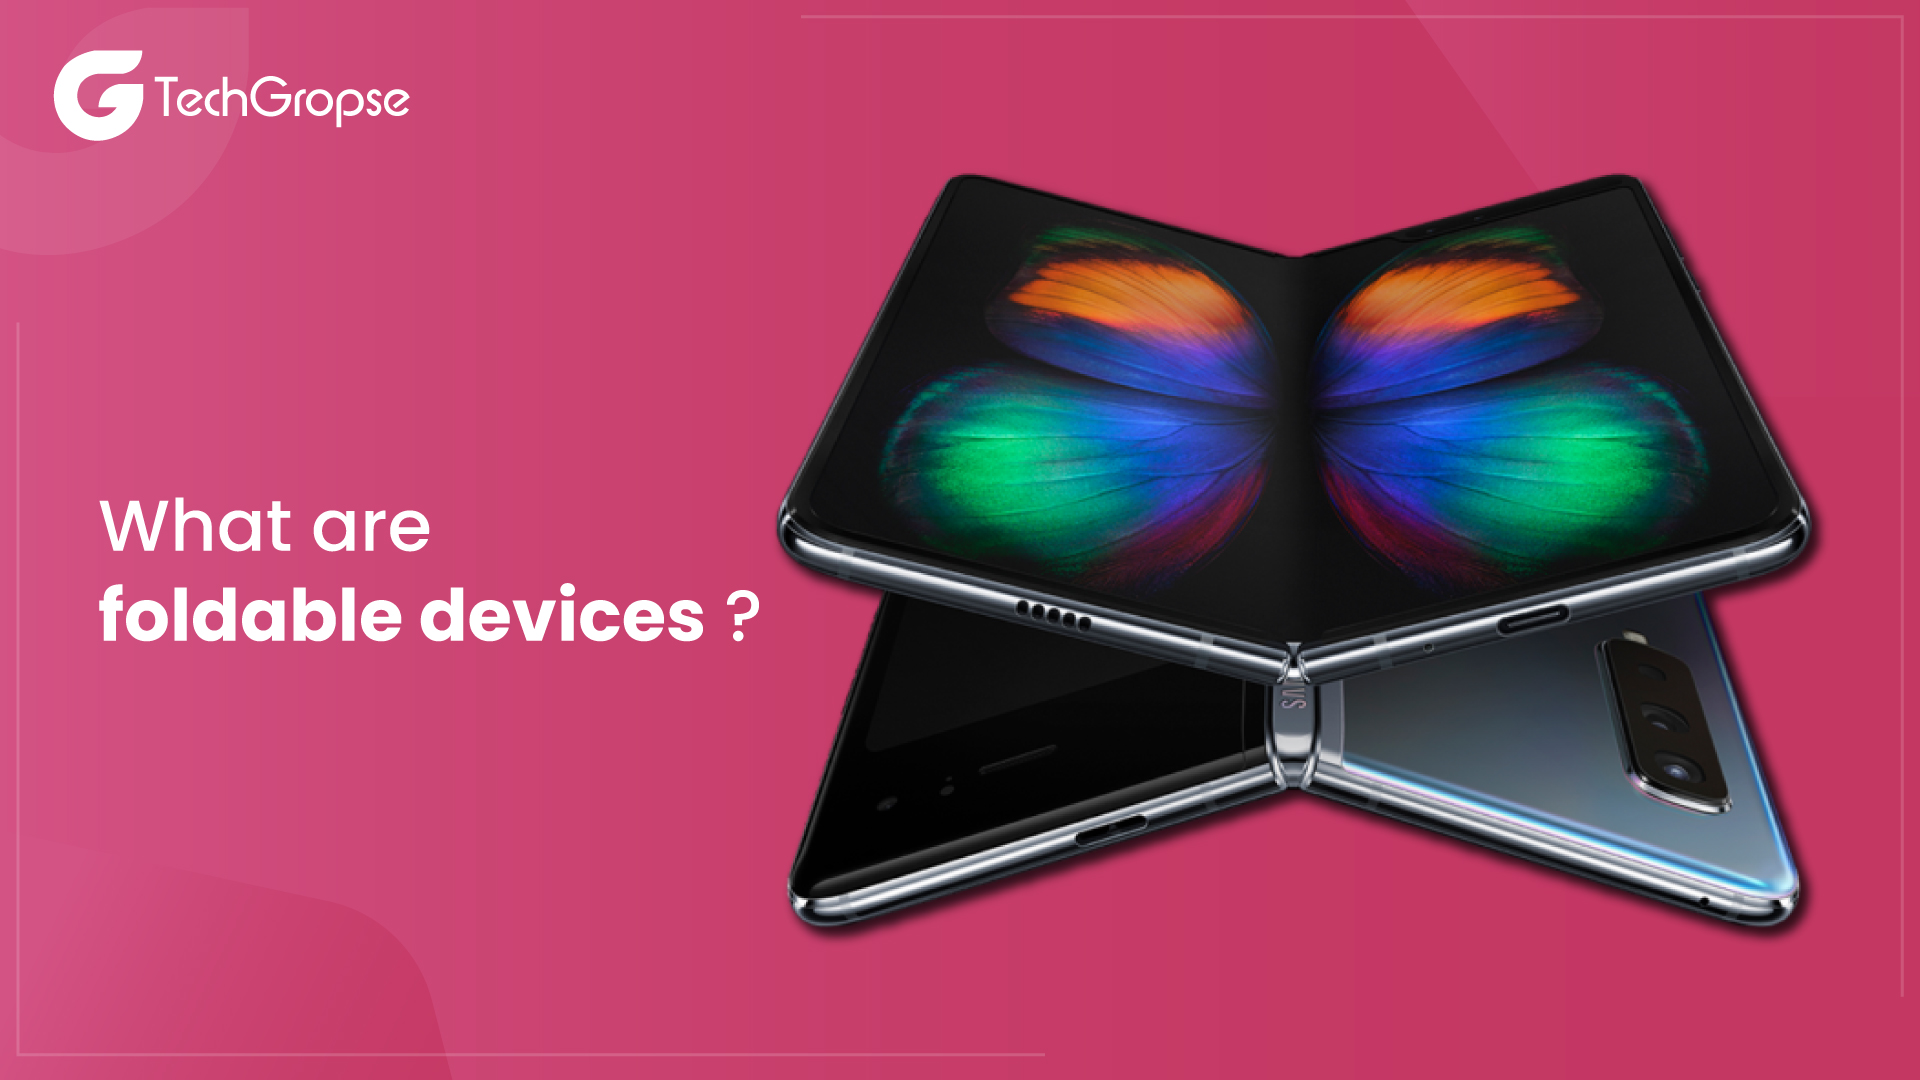 What are foldable devices